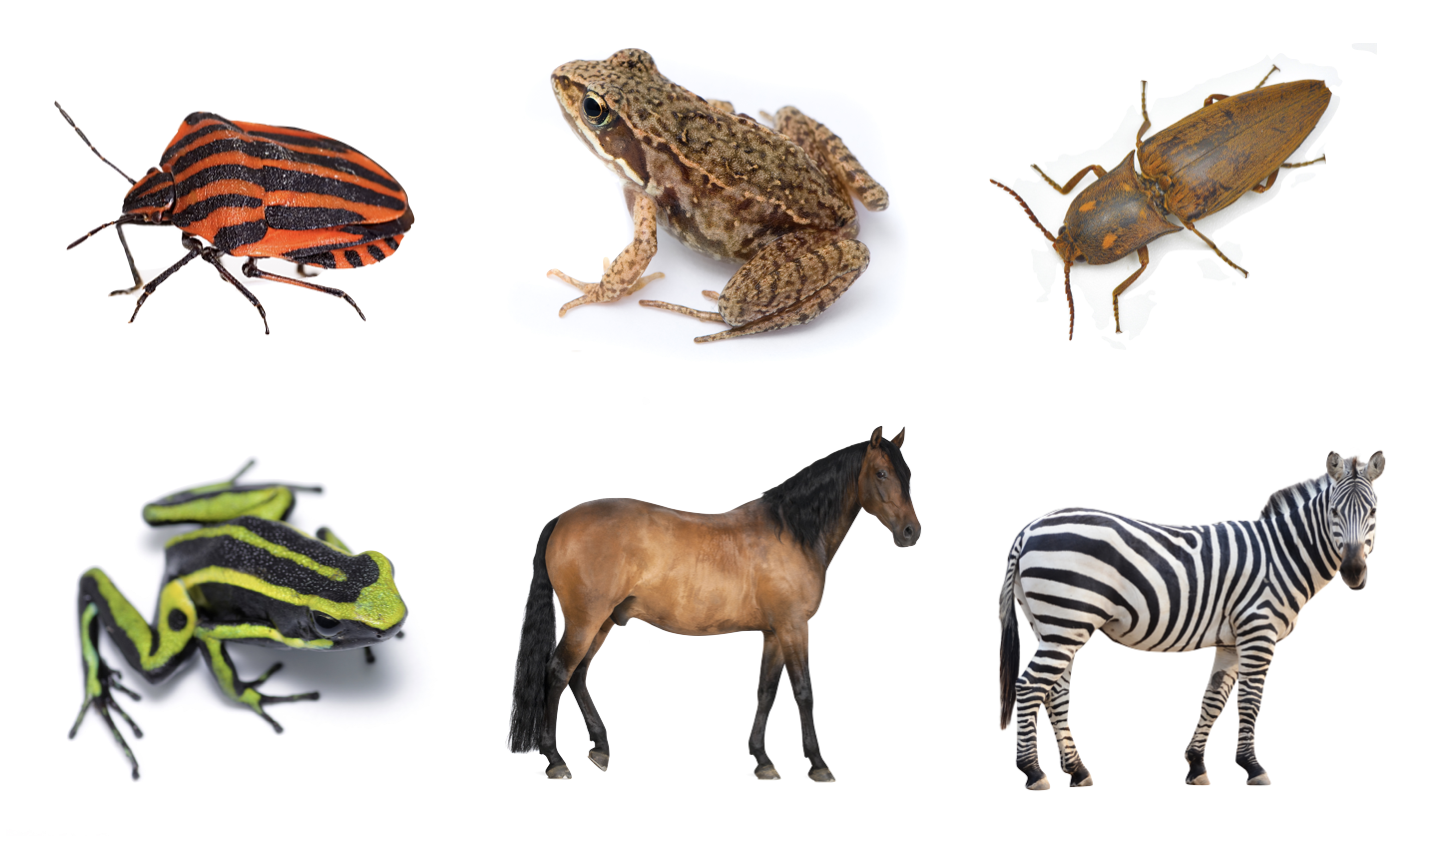 How many different kinds of animals are there?